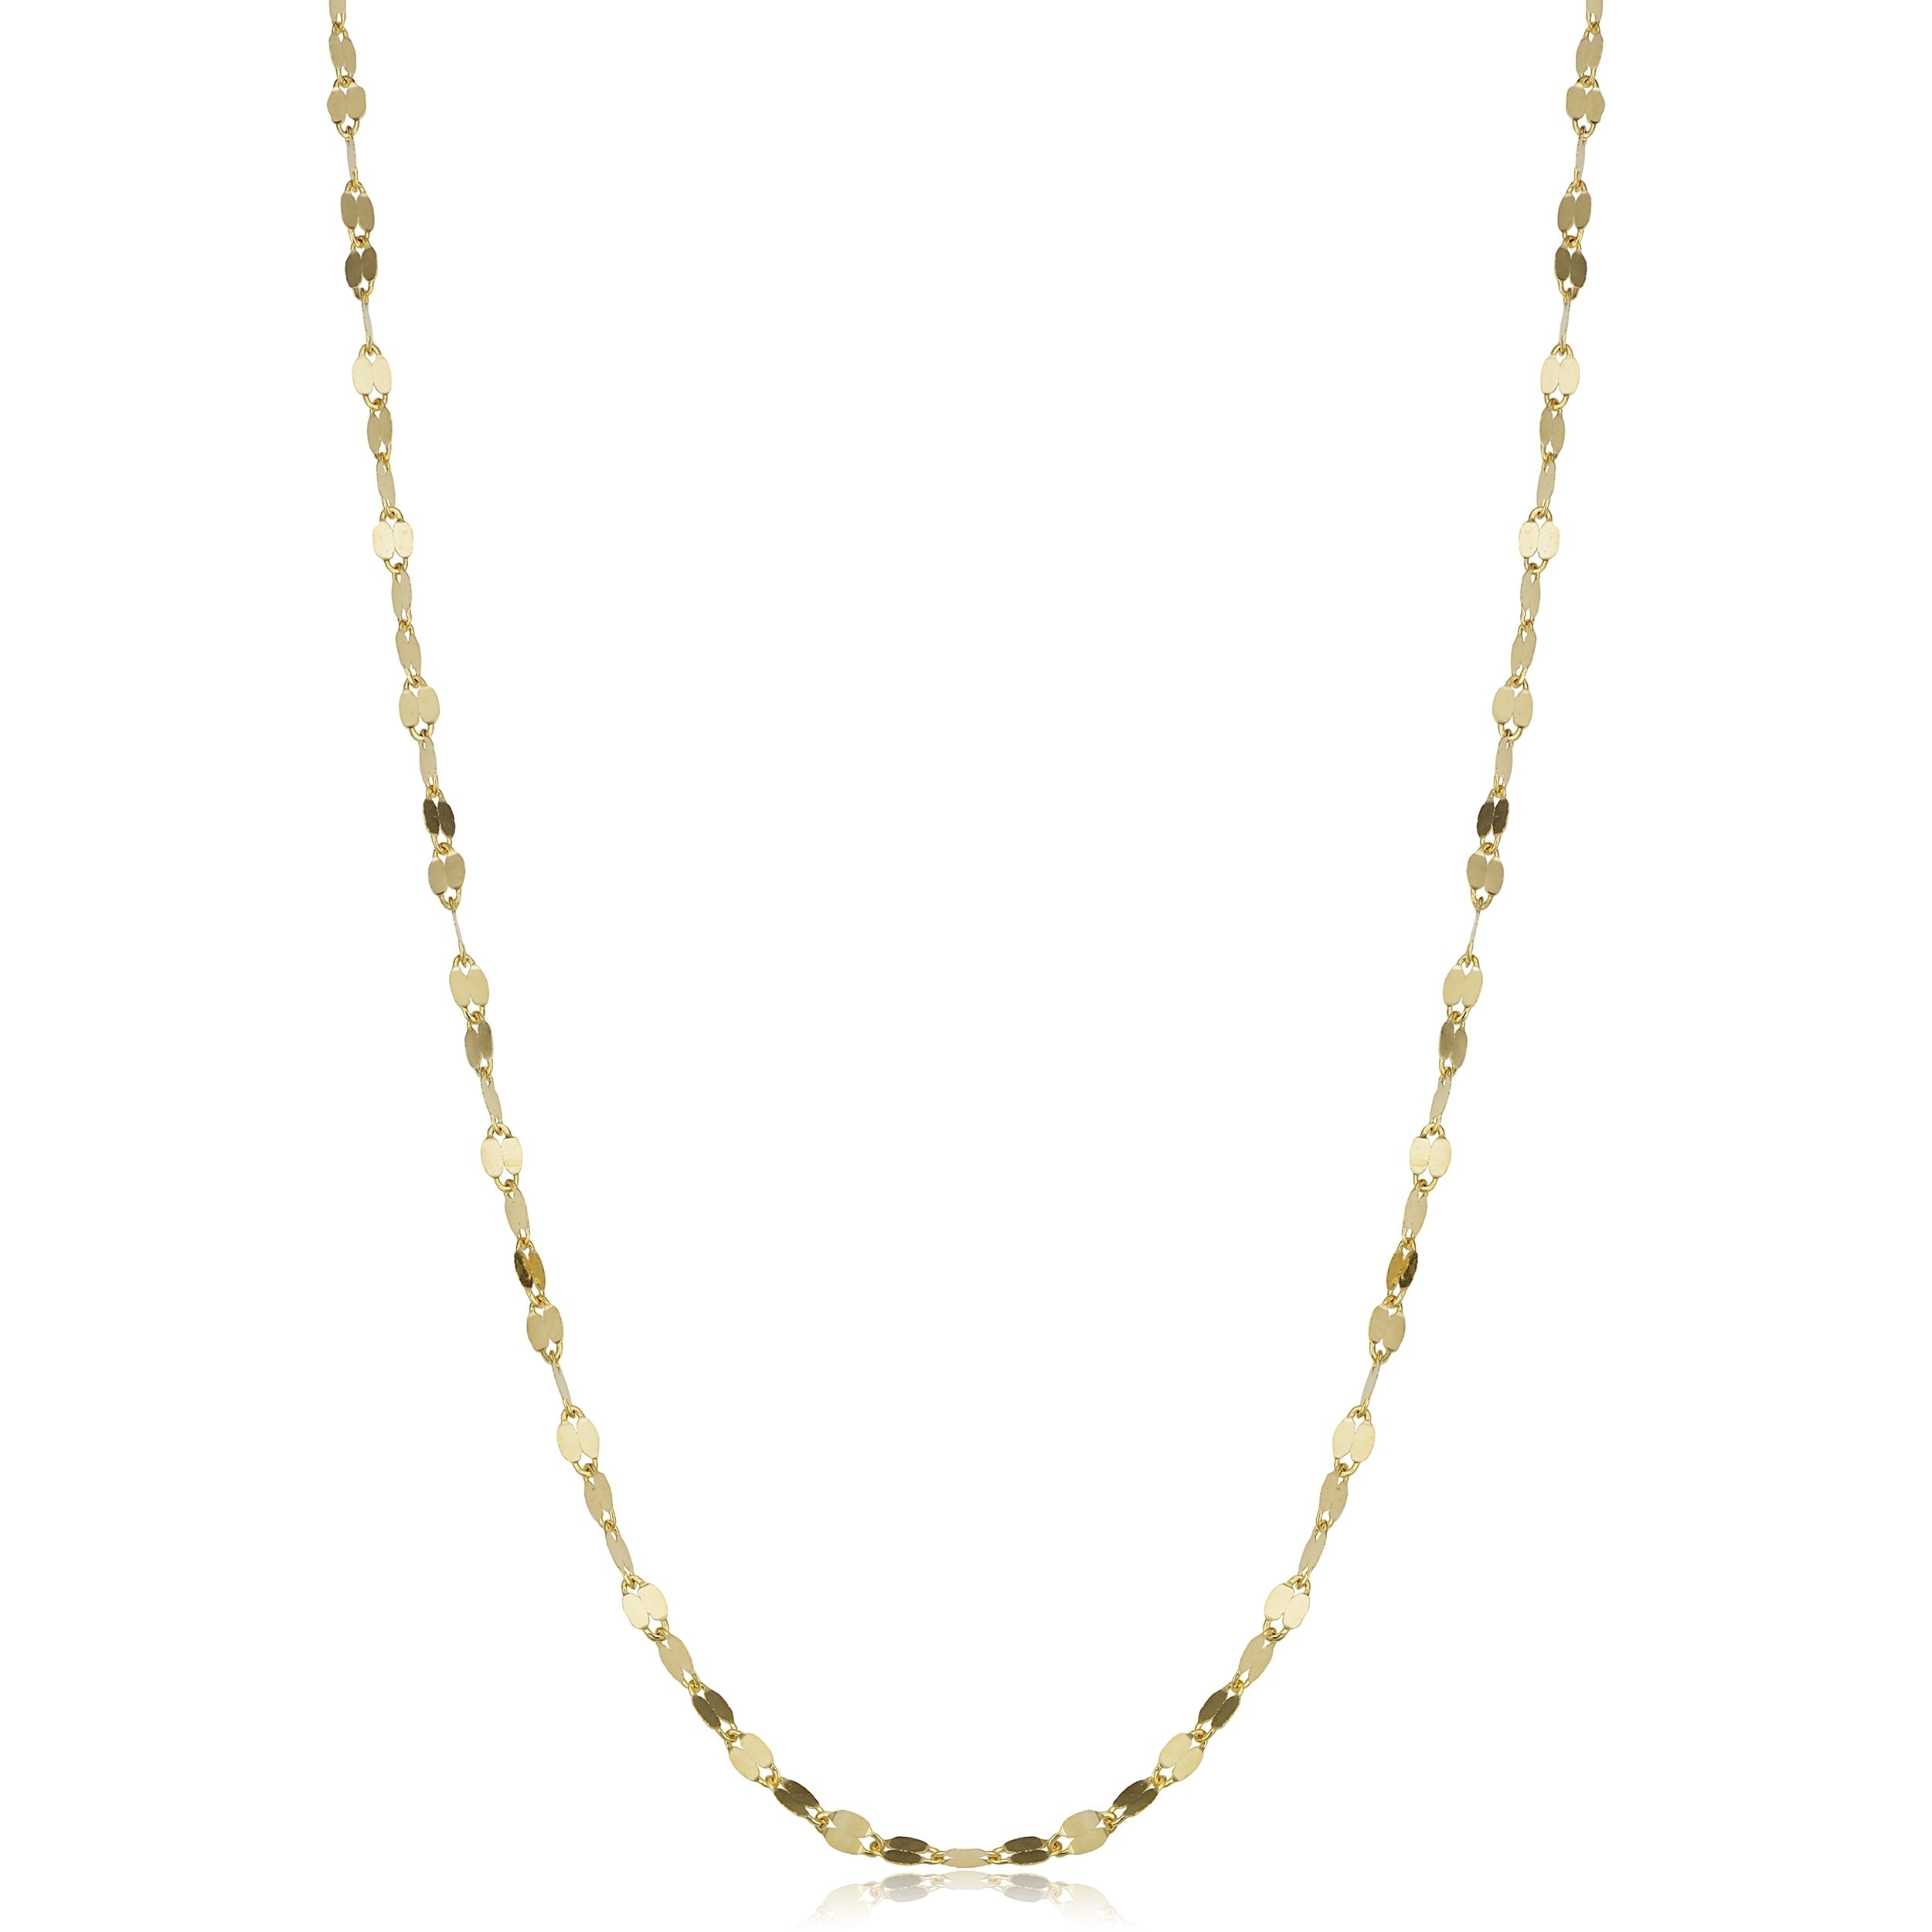 Details about   17" Diamond Shape Lariat Mirror Chain Necklace Real 14K Yellow Gold 2.2gr